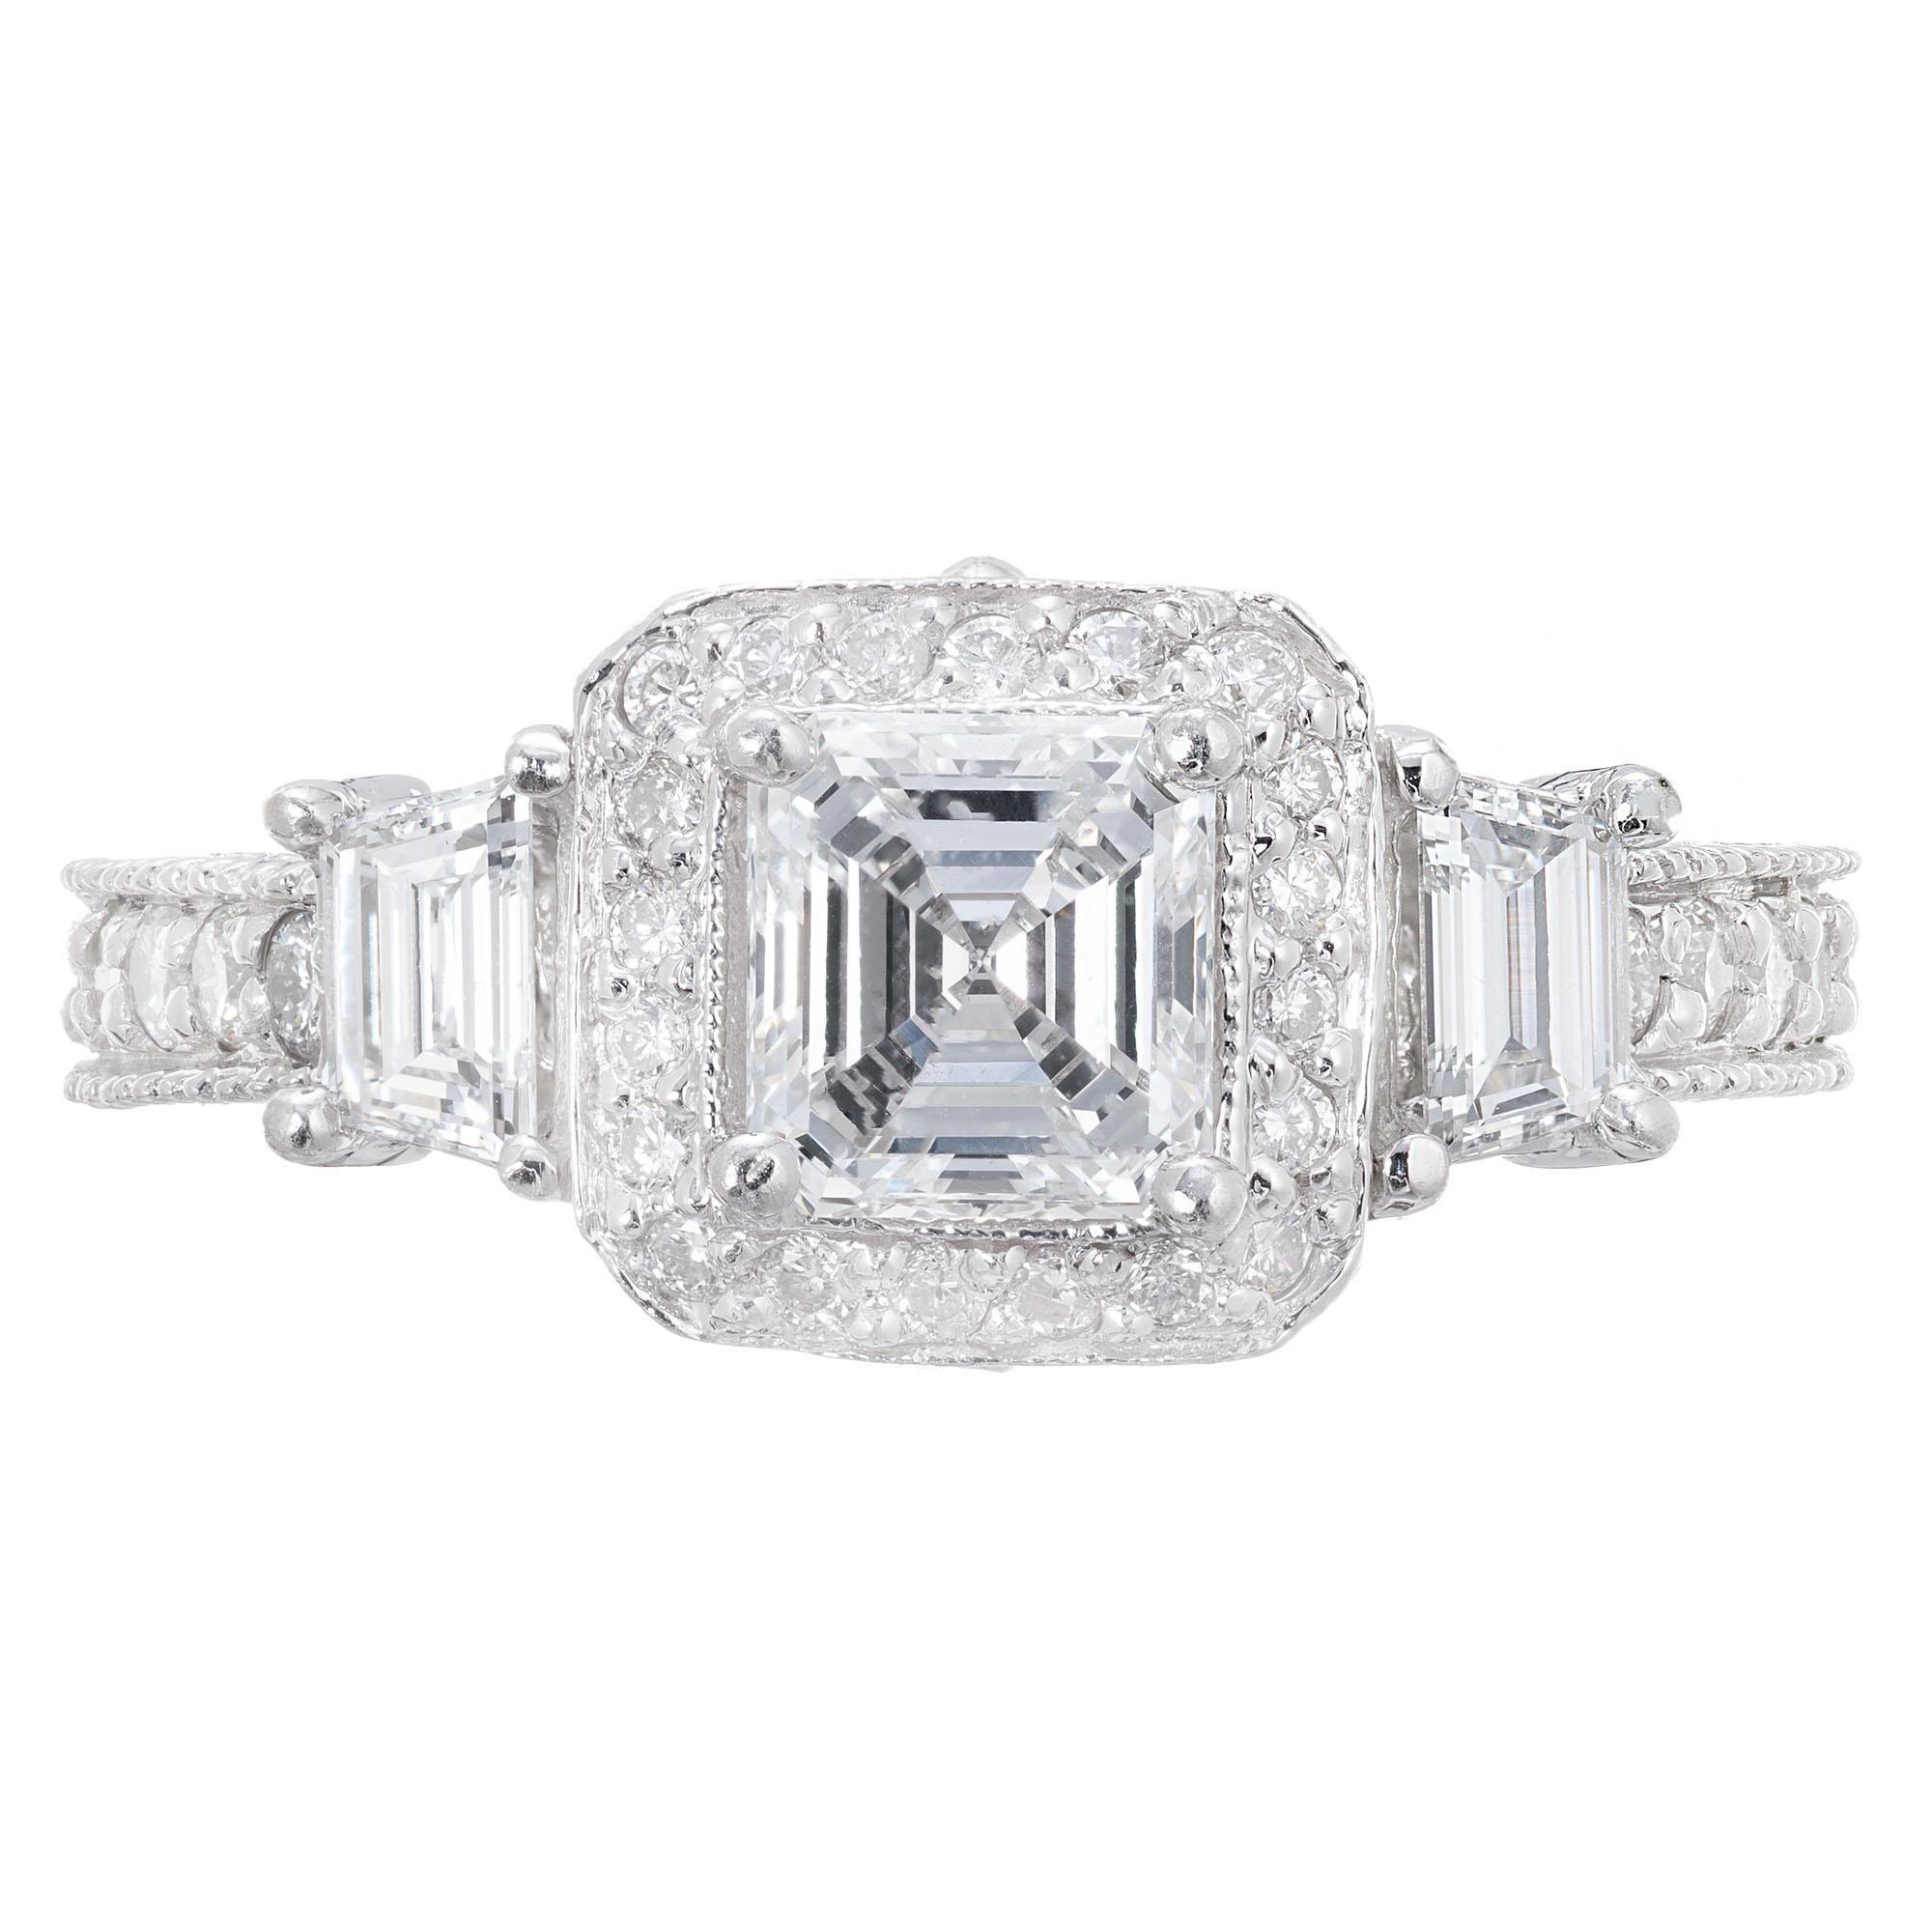 Diamond three-stone engagement ring. GIA certified 1.01 Asscher cut center stone with a halo of round cut diamonds. Accented with 2 trapezoid side diamonds and round cut diamonds along the hand engraved shank. Designed by Peter Suchy Workshop.